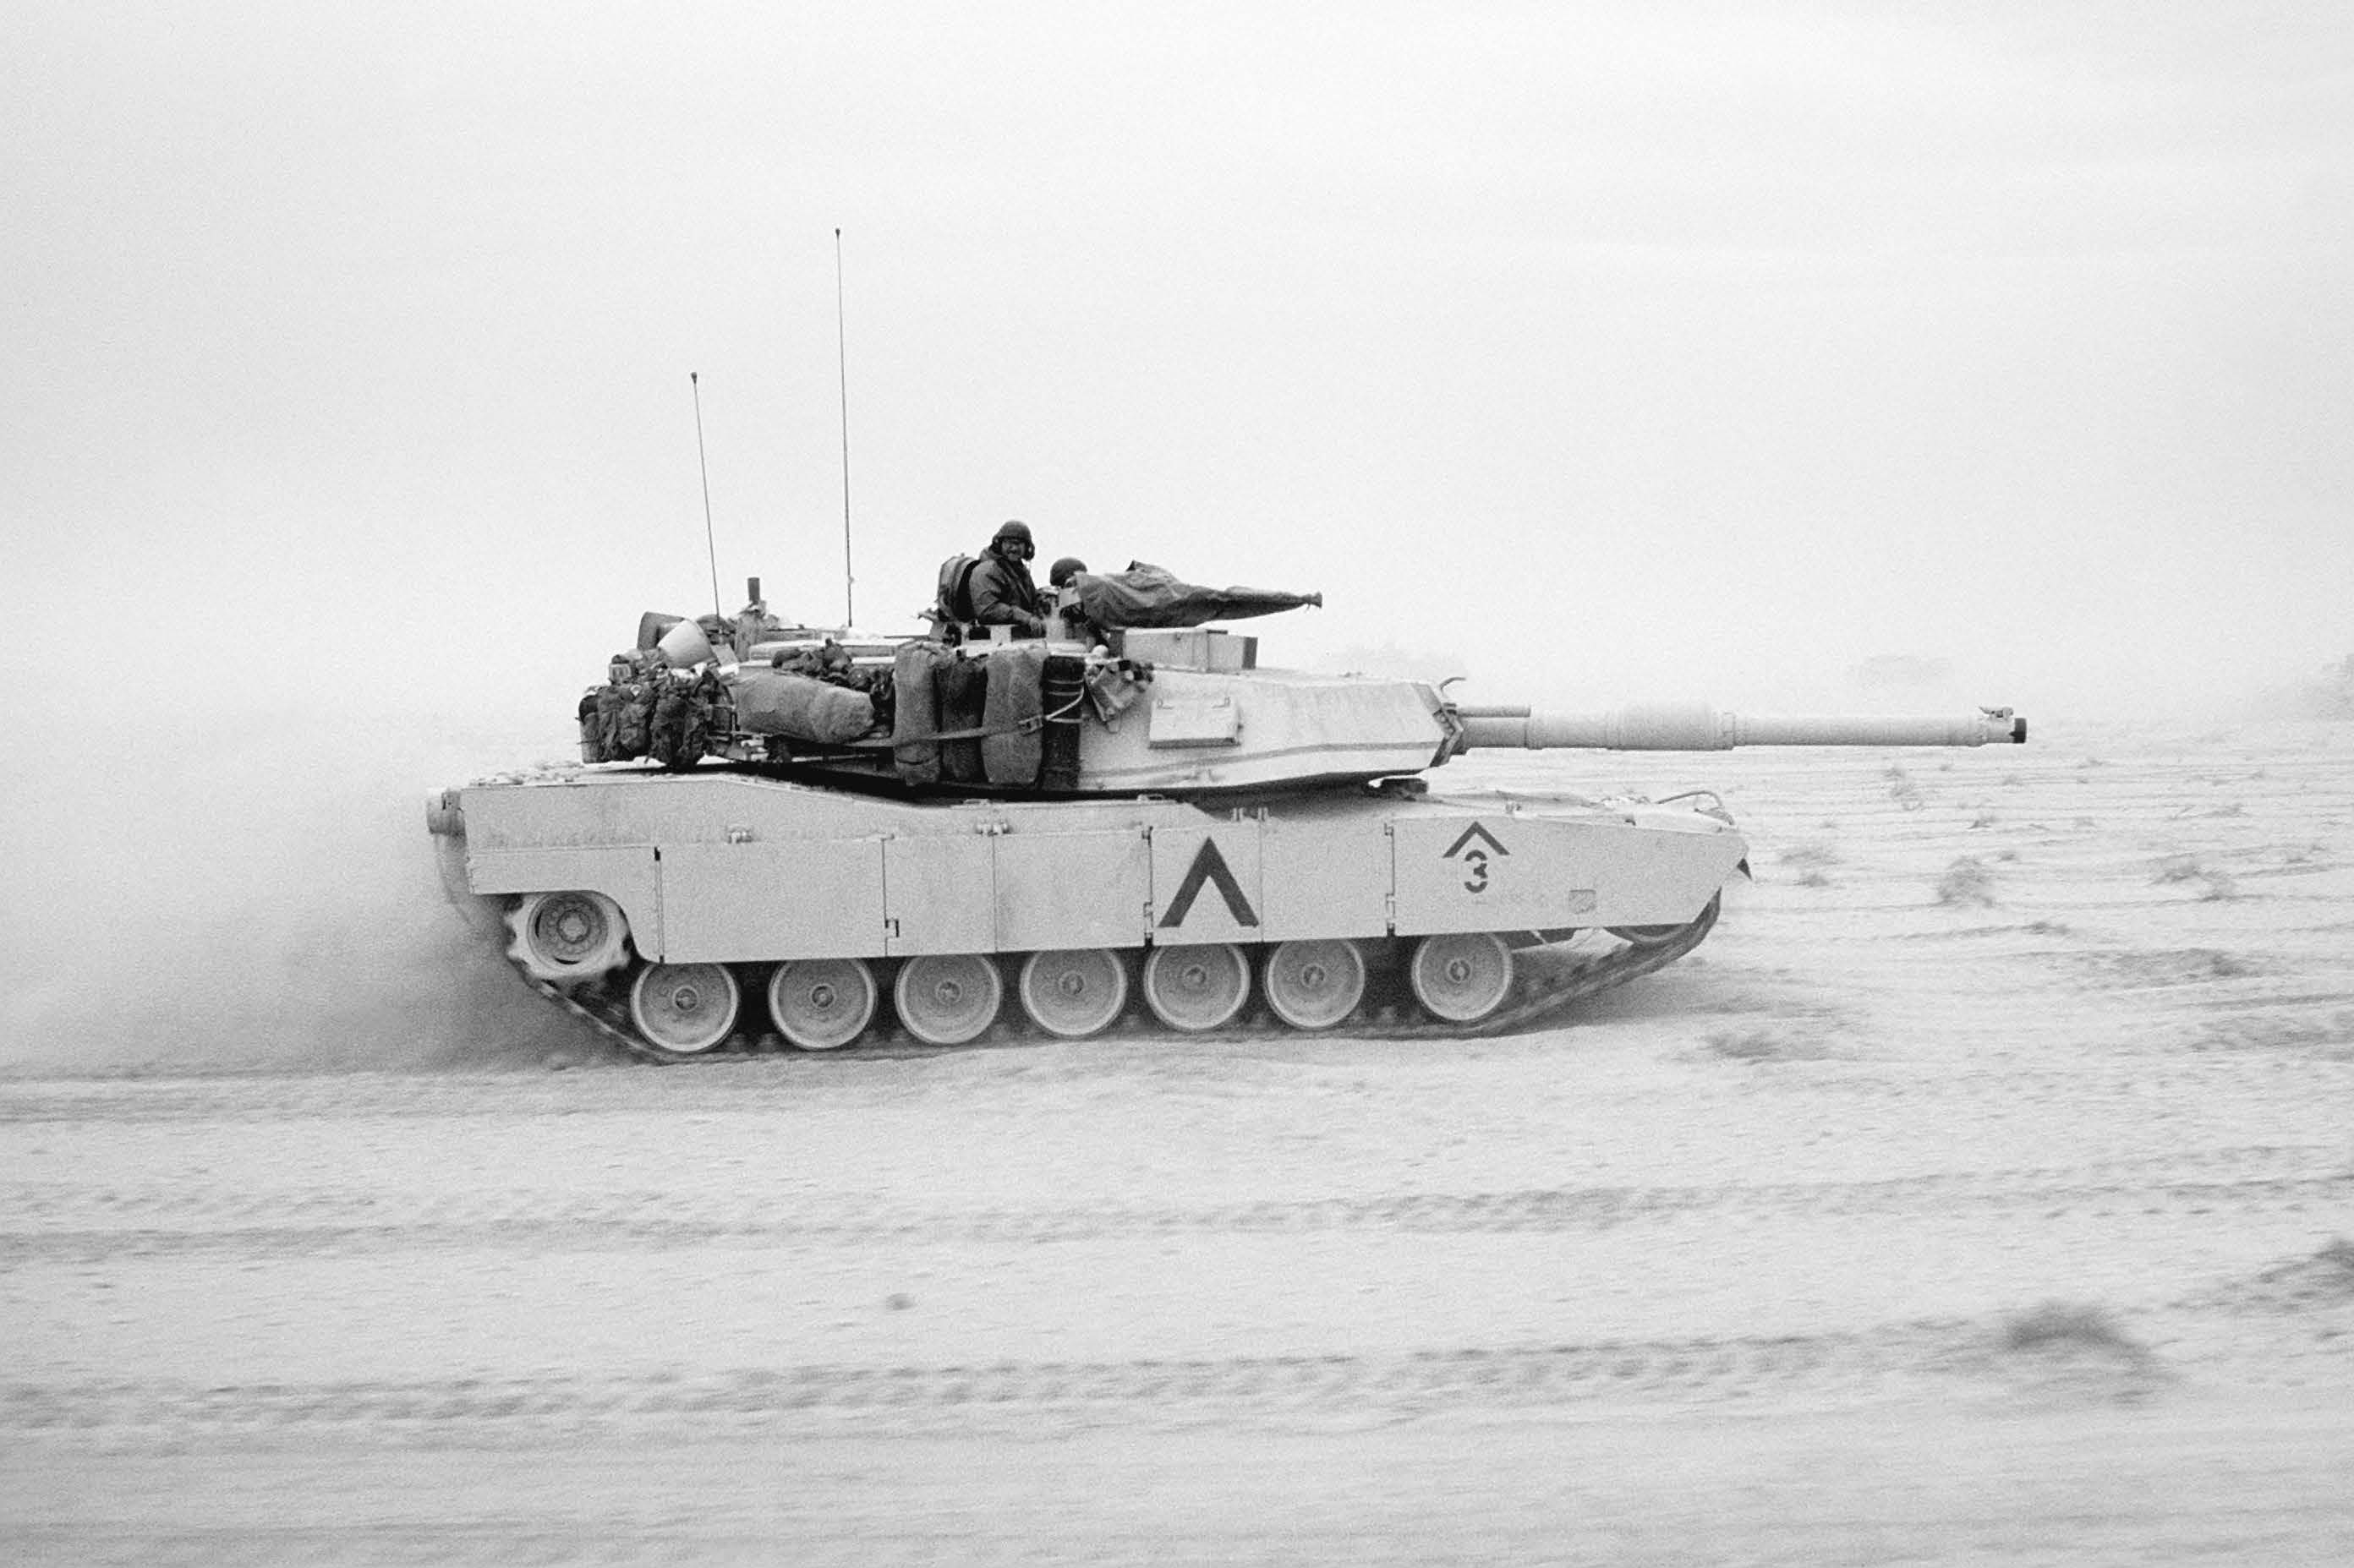 An M-1A1 Abrams battle tank of 1st Armored Division, 7th Corps, moves across the desert in northern Kuwait during Operation Desert Storm. Courtesy of DoD.